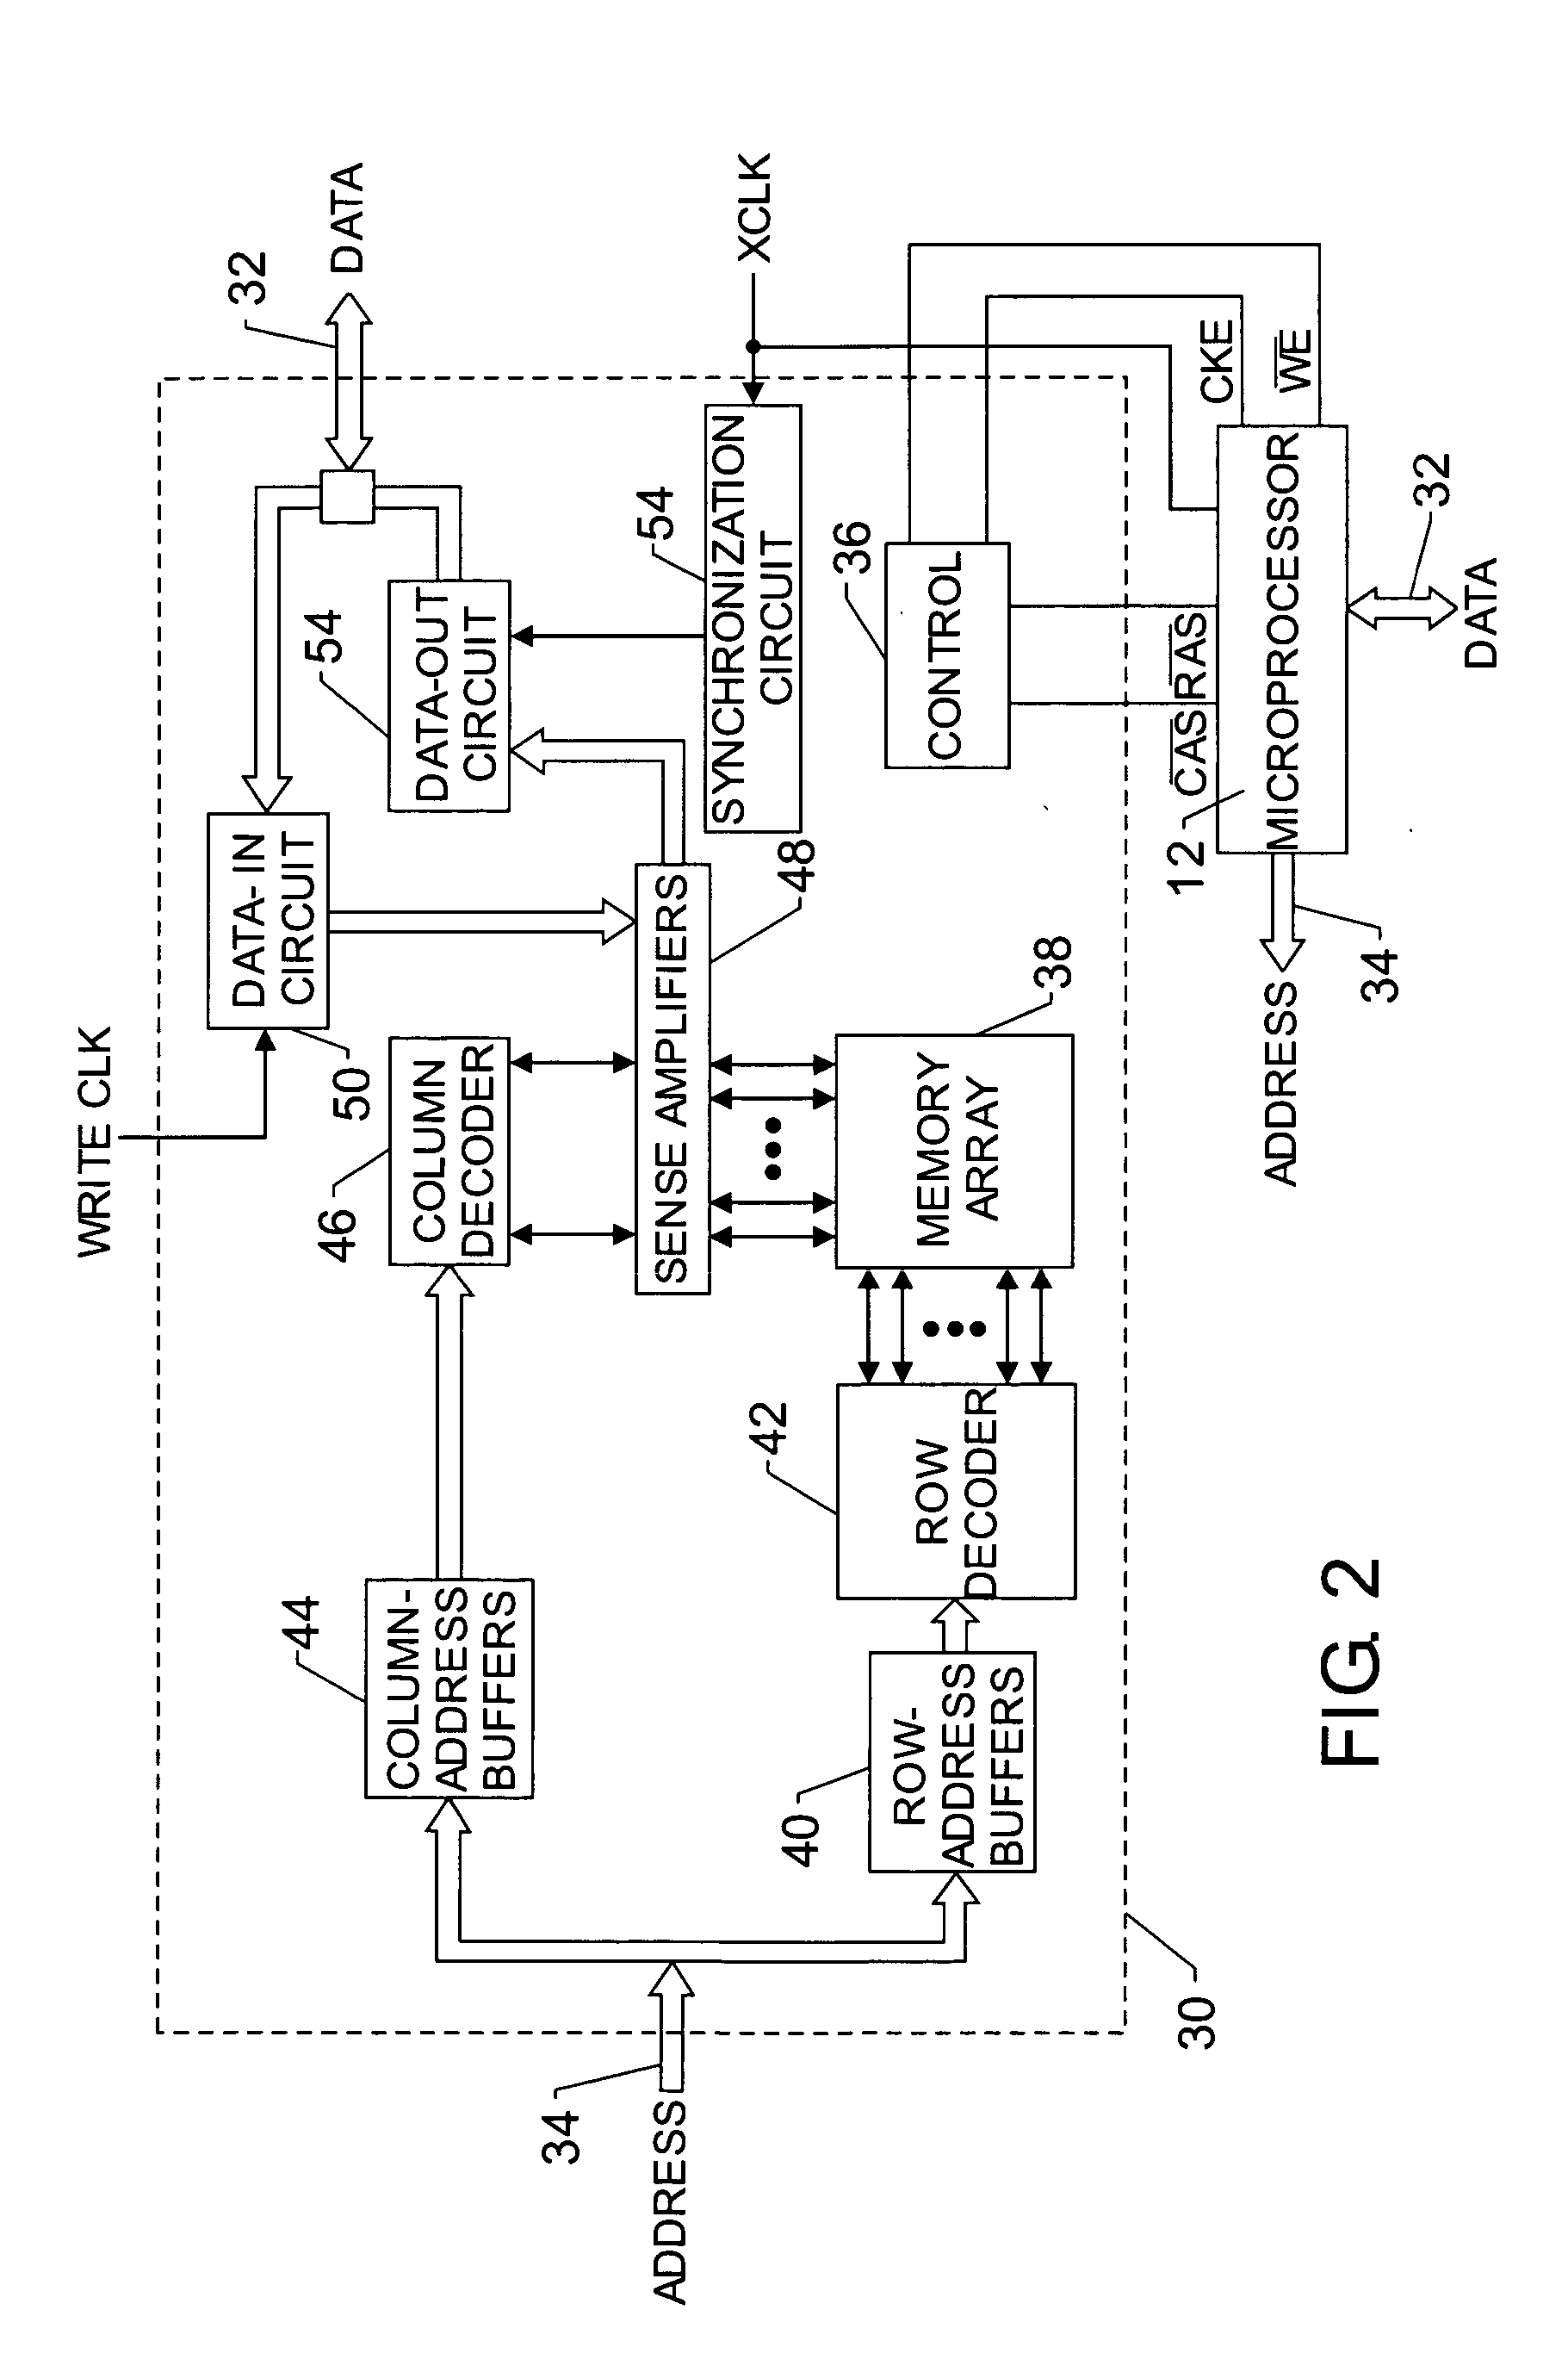 Synchronization devices having input/output delay model tuning elements